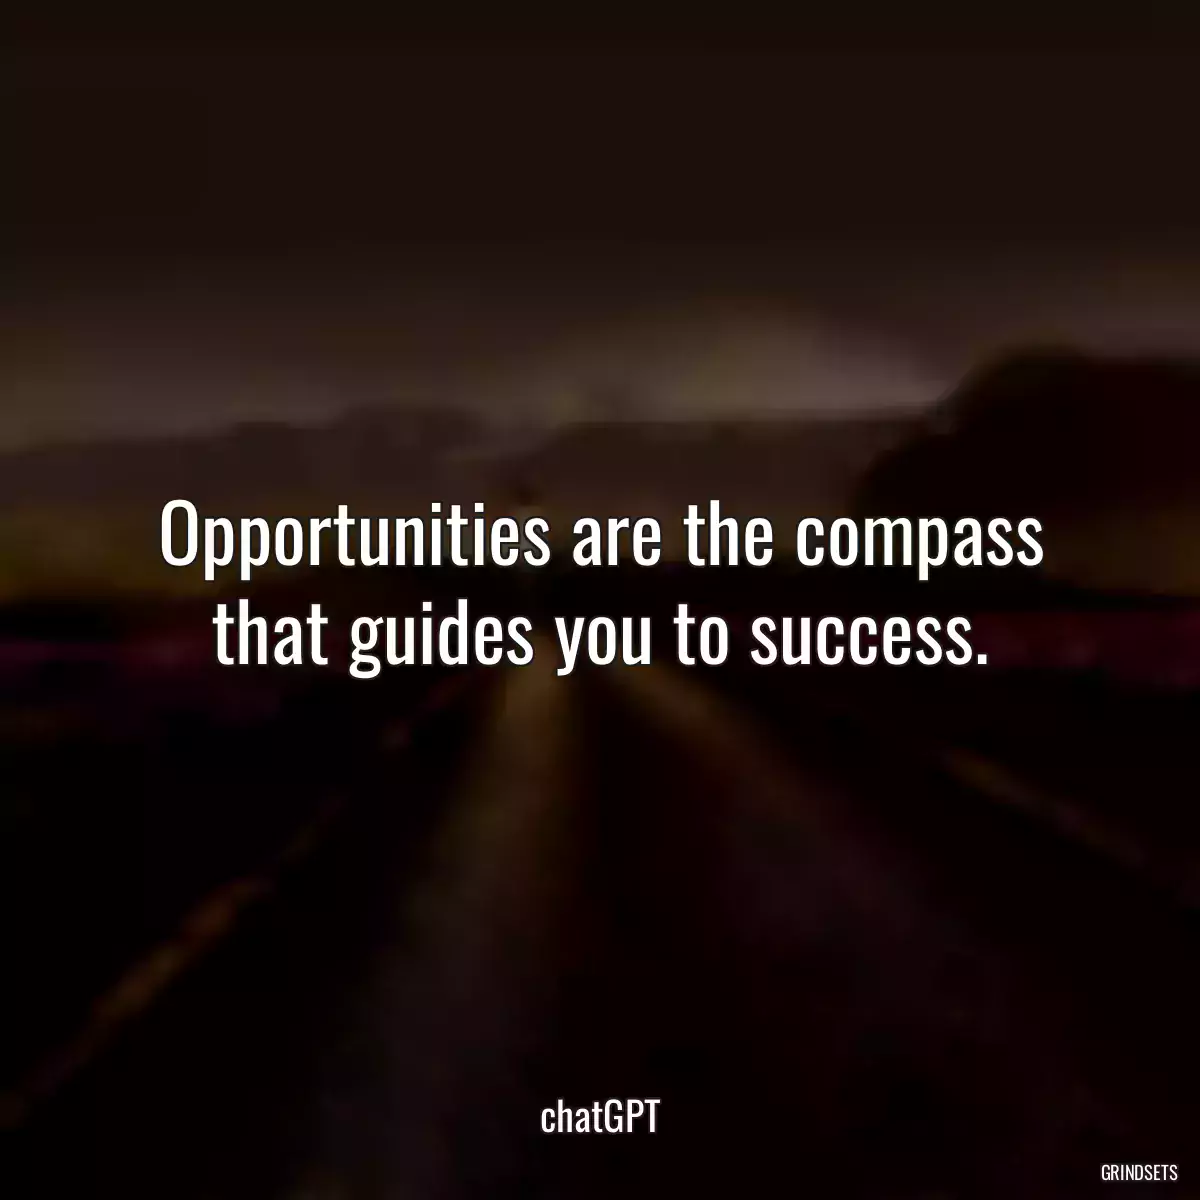 Opportunities are the compass that guides you to success.